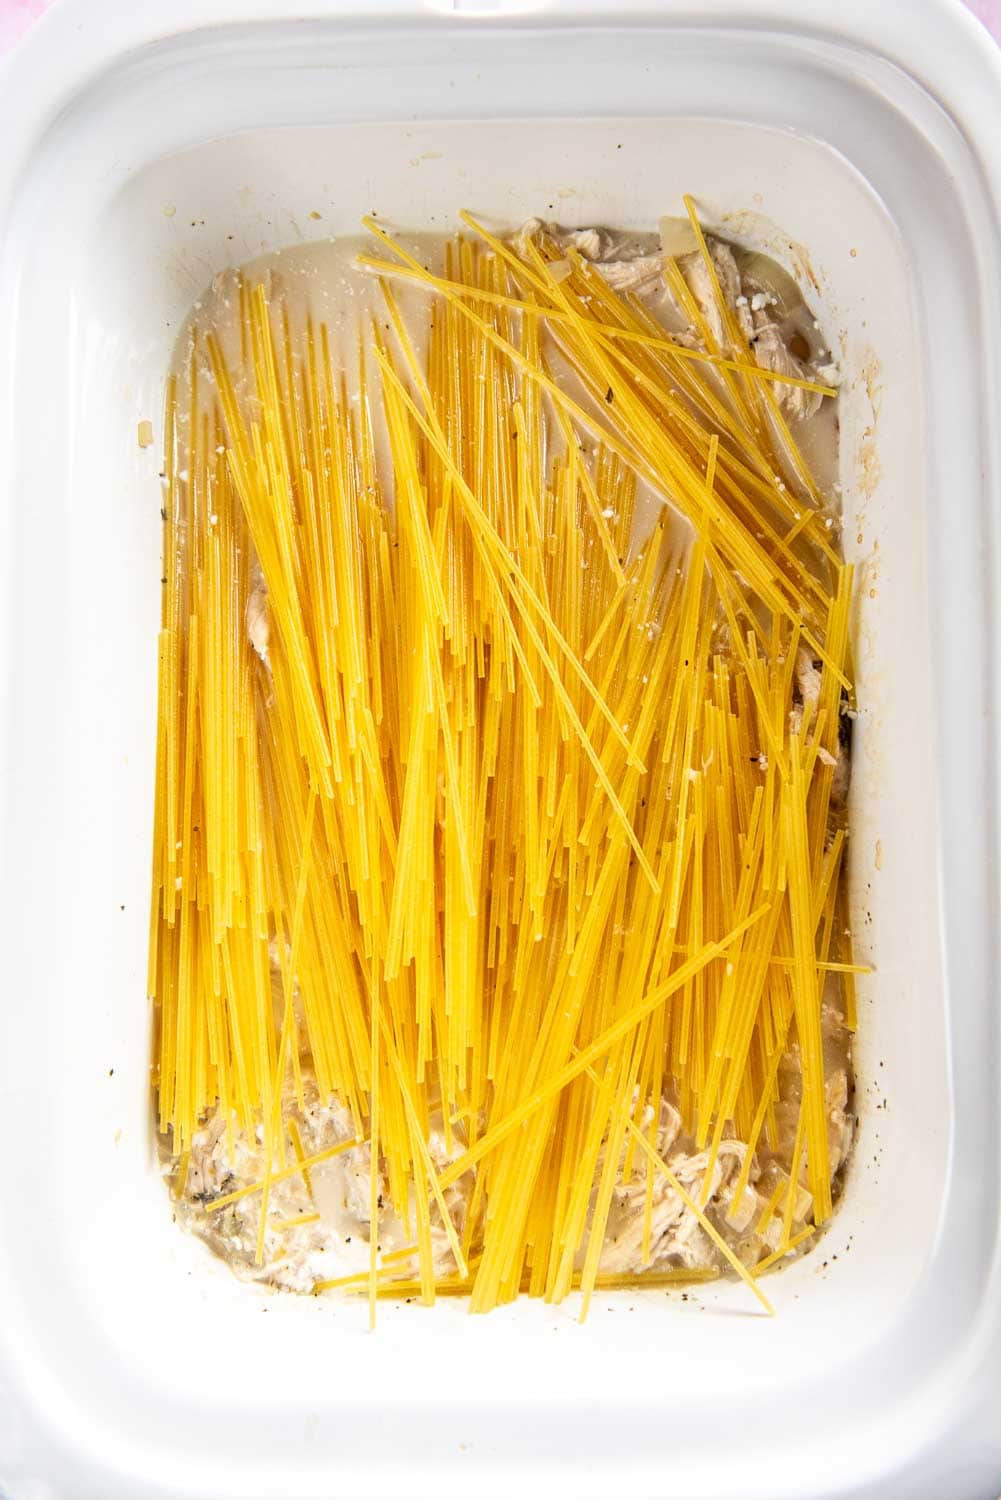 uncooked noodles on top of uncooked chicken casserole mixture